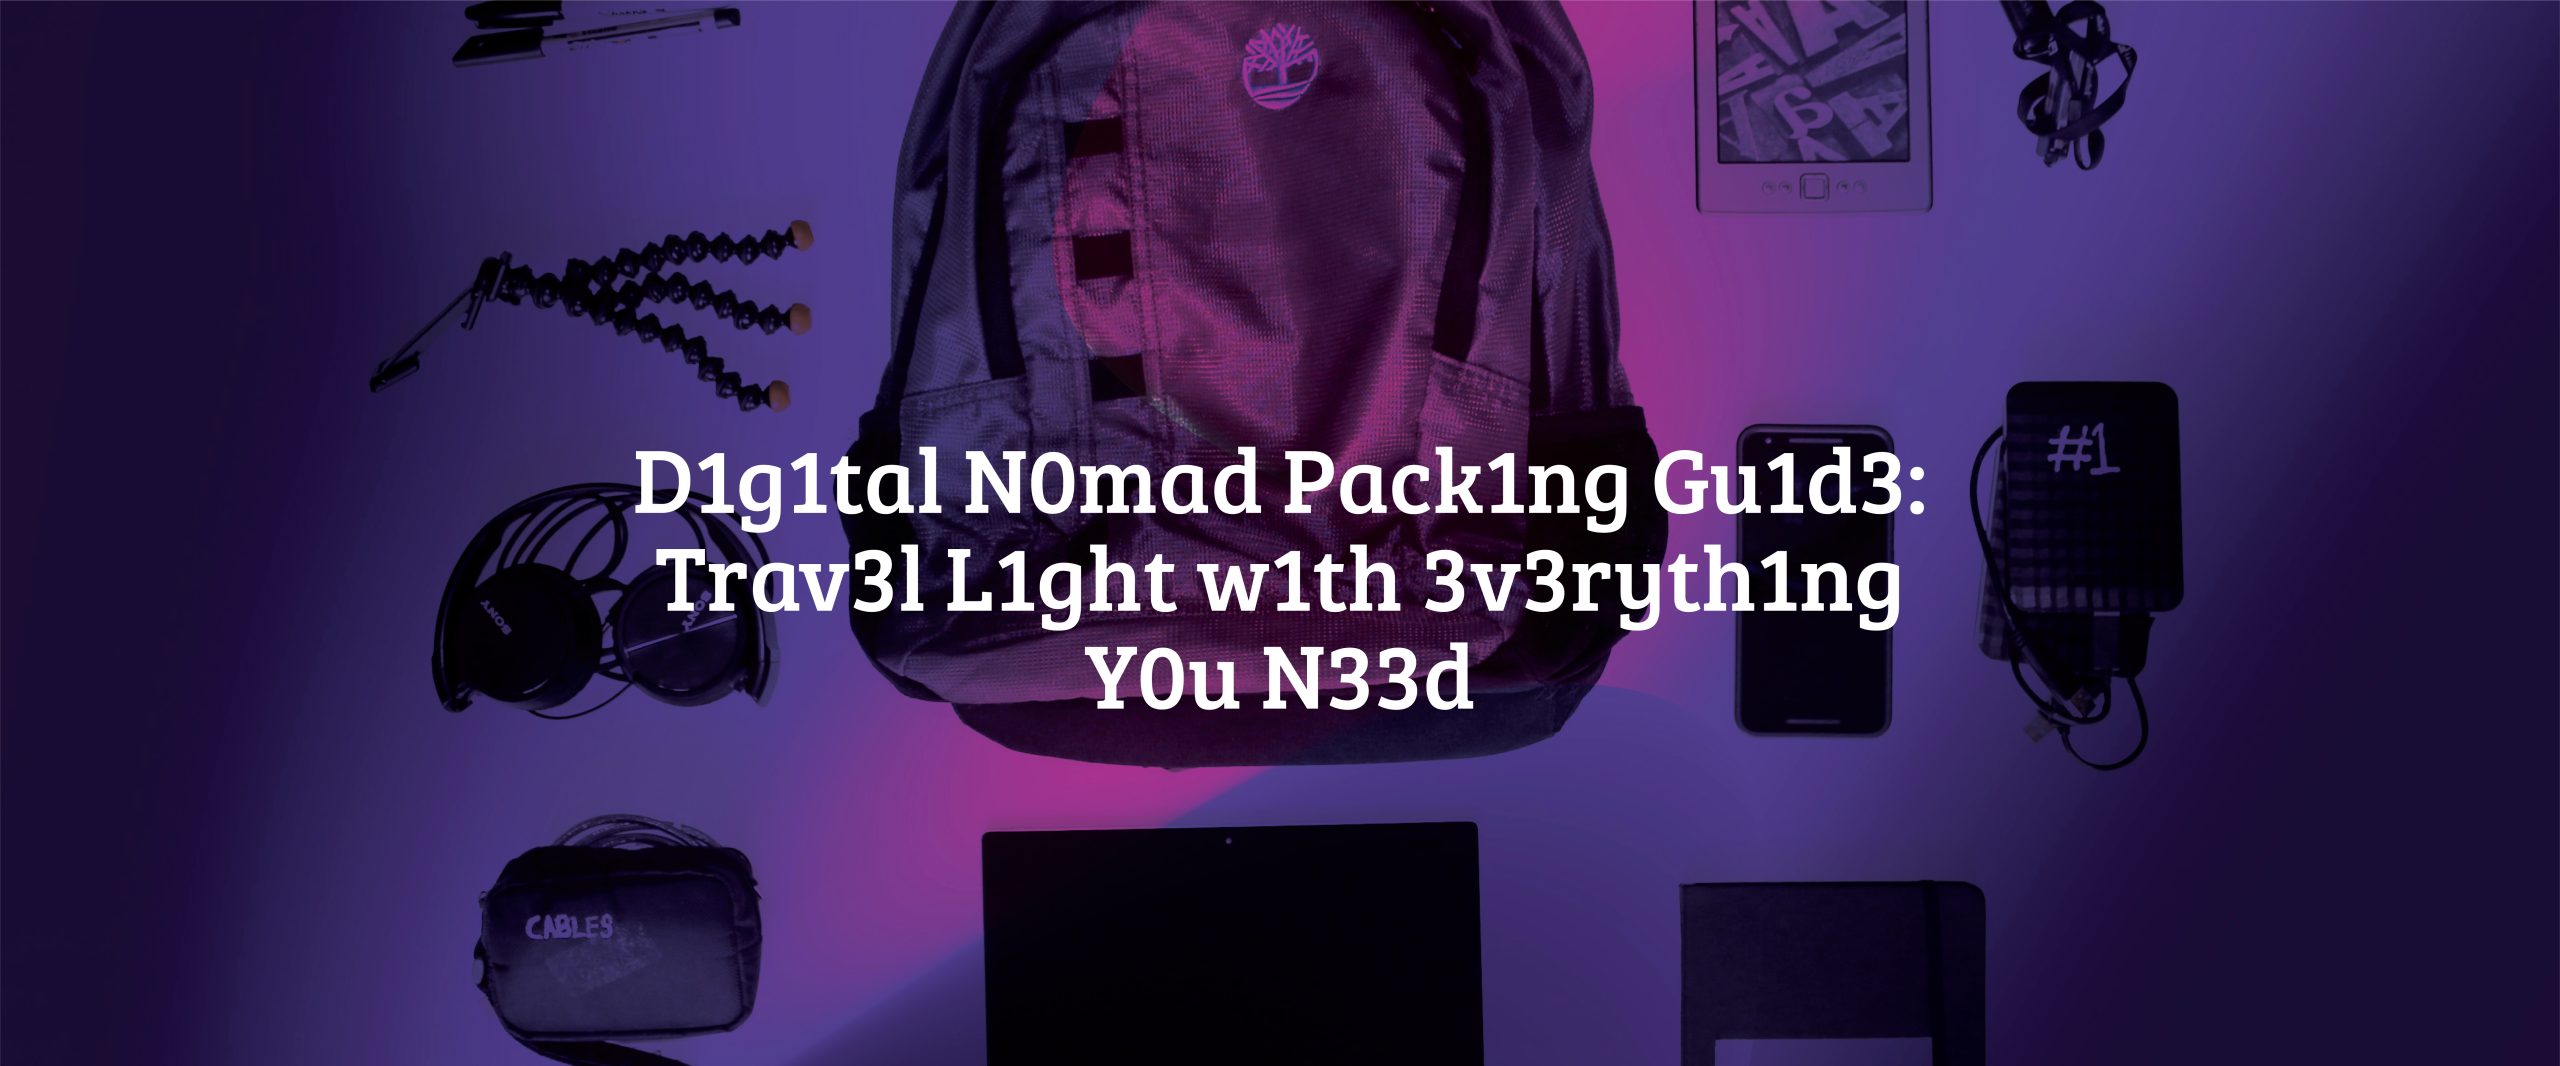 Digital Nomad Packing Guide: Travel Light with Everything You Need